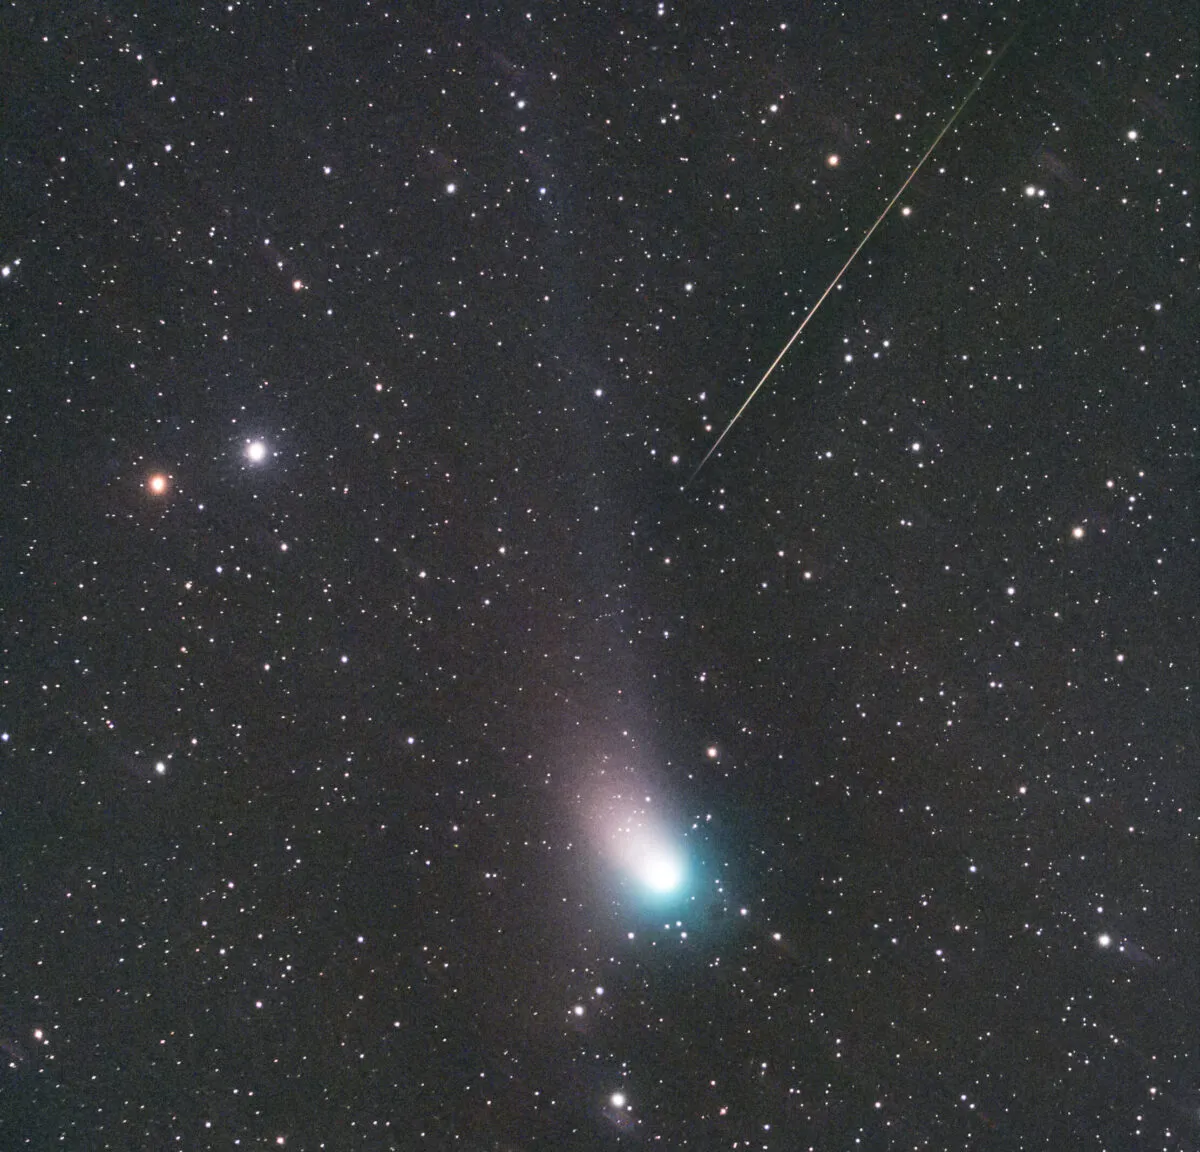 Darshna Ladva was capturing images of Comet E3 in the morning of 18 January 2023 when she caught a meteor in the same view. See more of her photos on Instagram at @nebuladva.